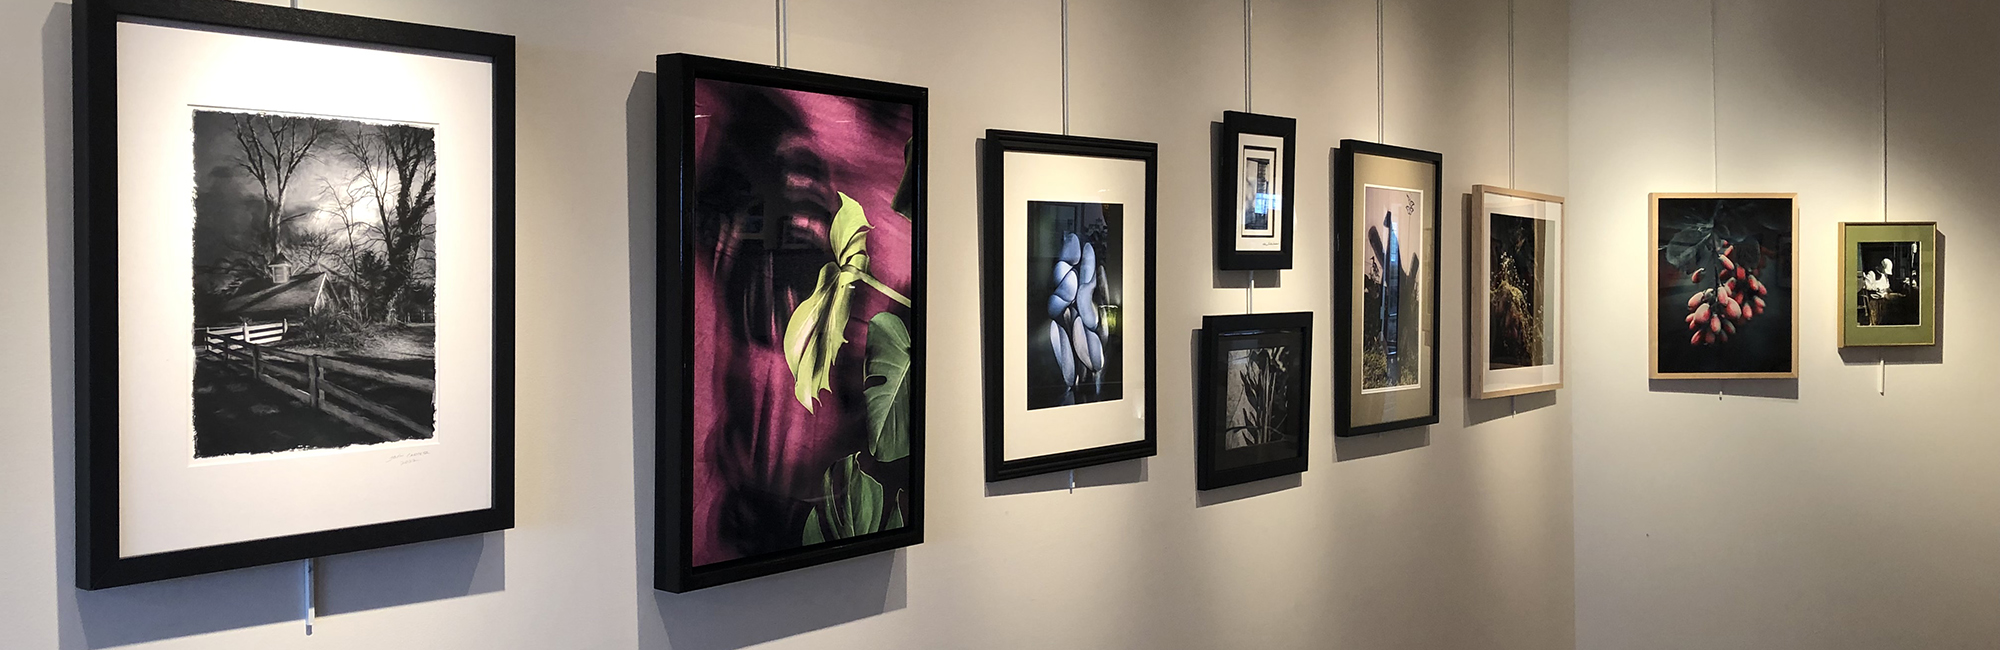 Featured in the Sisson Galleria / "Shadows", Photography Juried Show